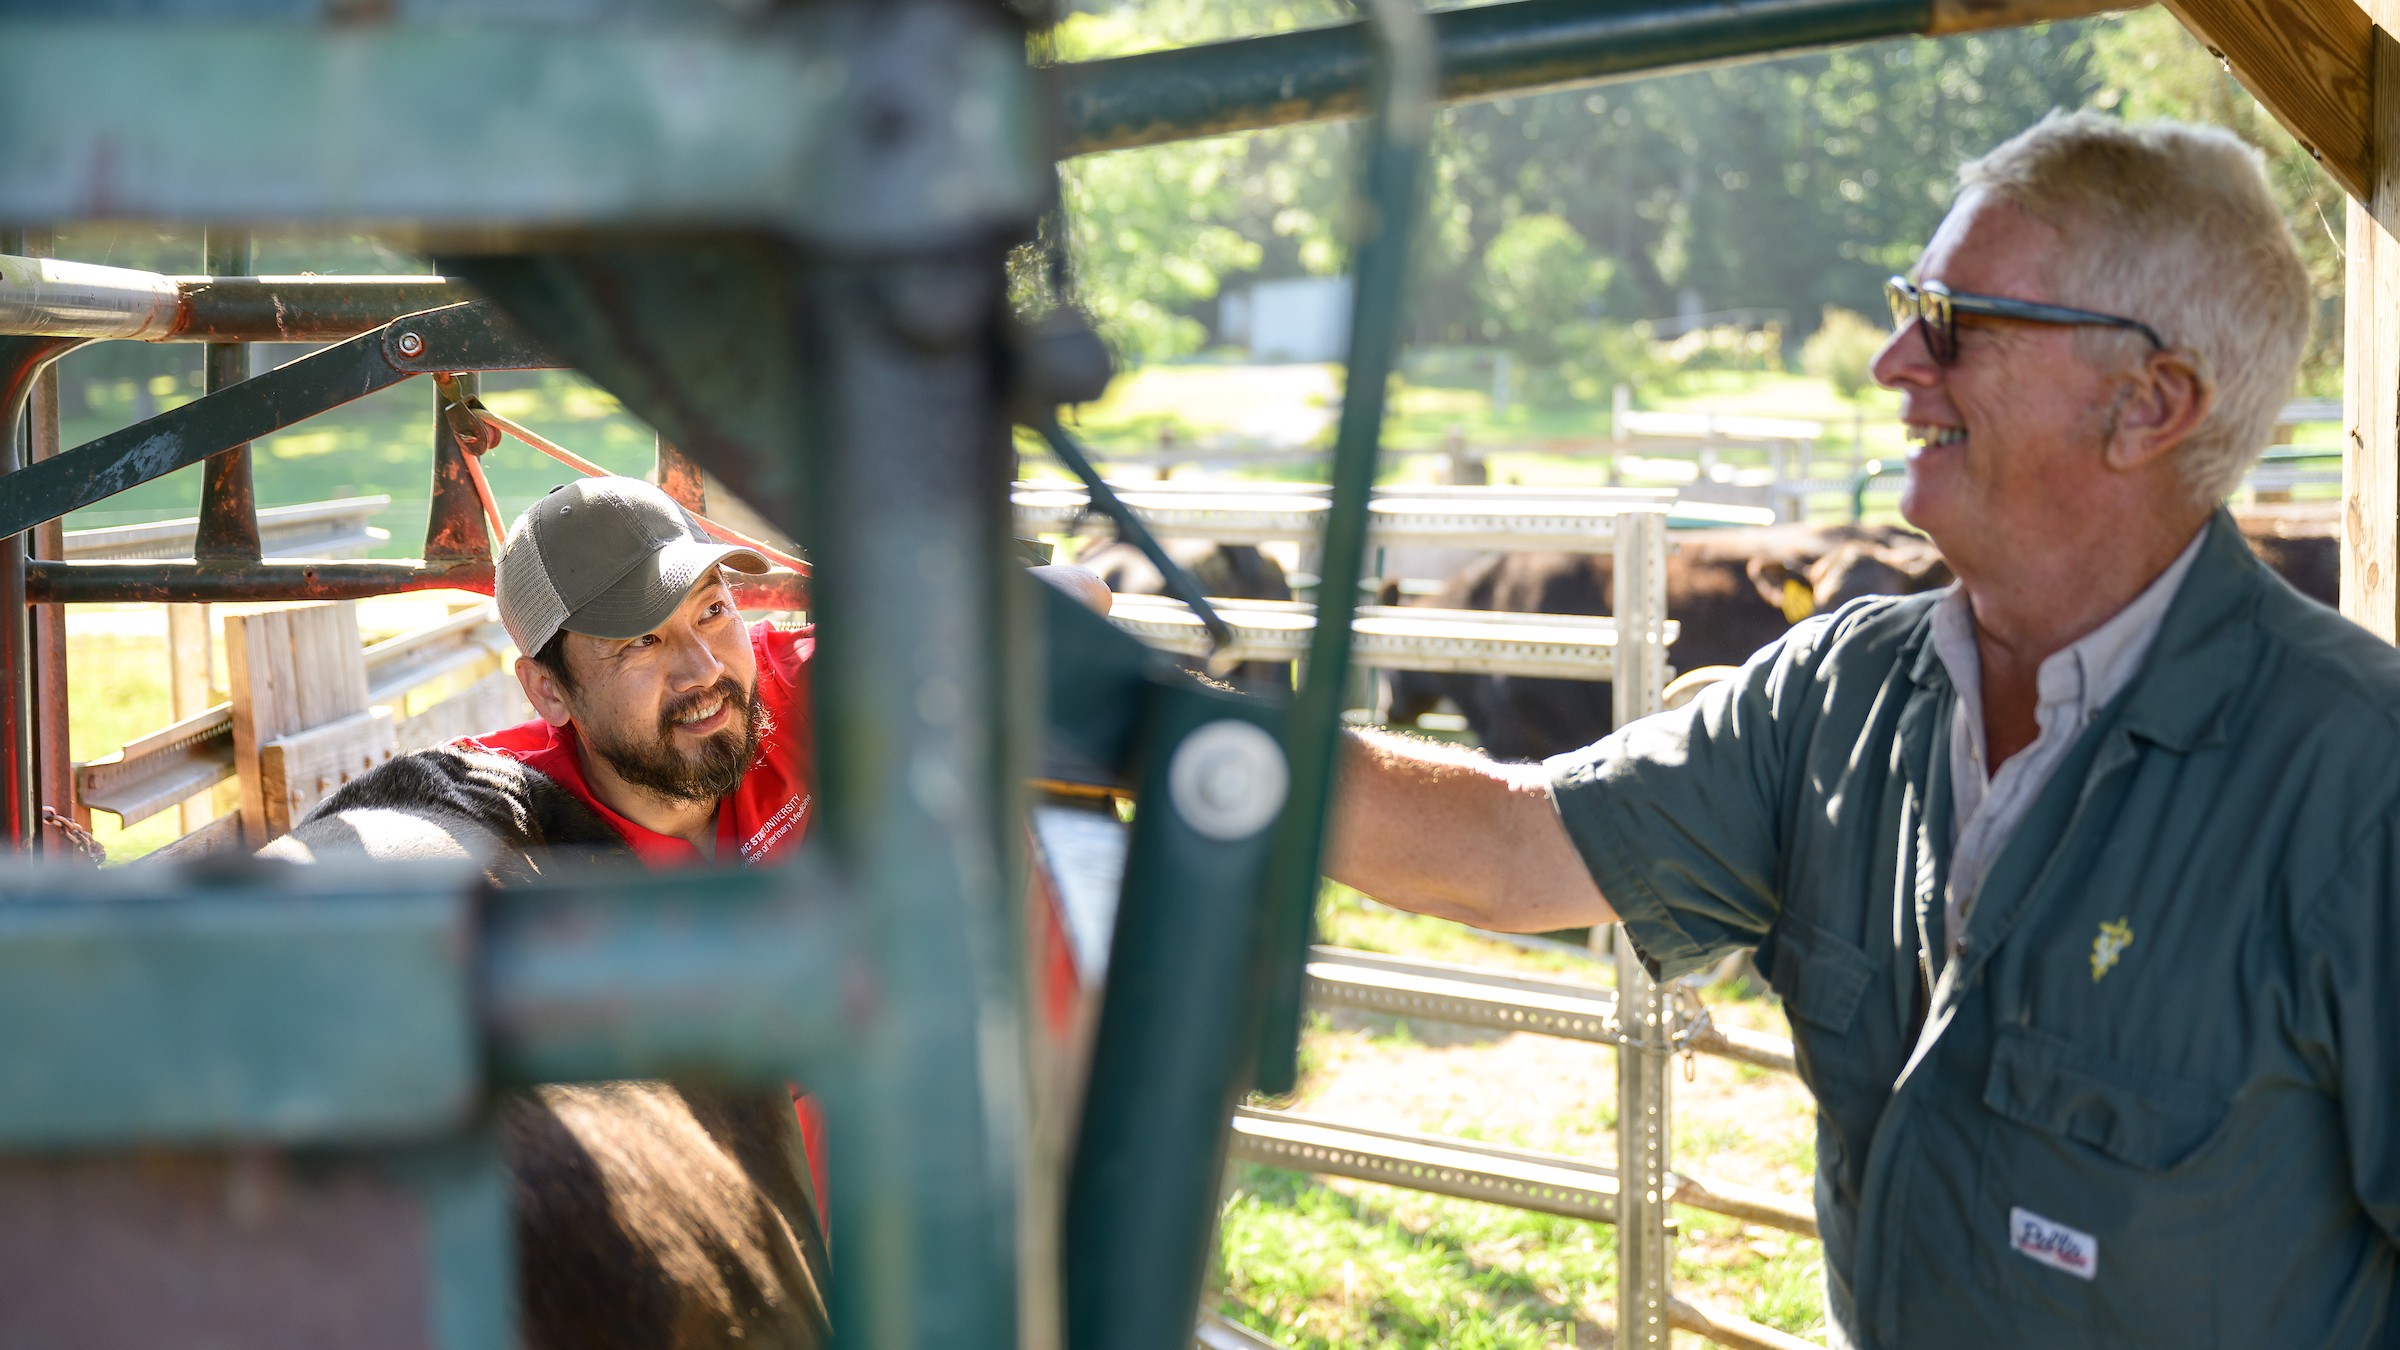 A male veterinary student working with a black cow in a cattle chute smiles at the mentor veterinarian he's working with.